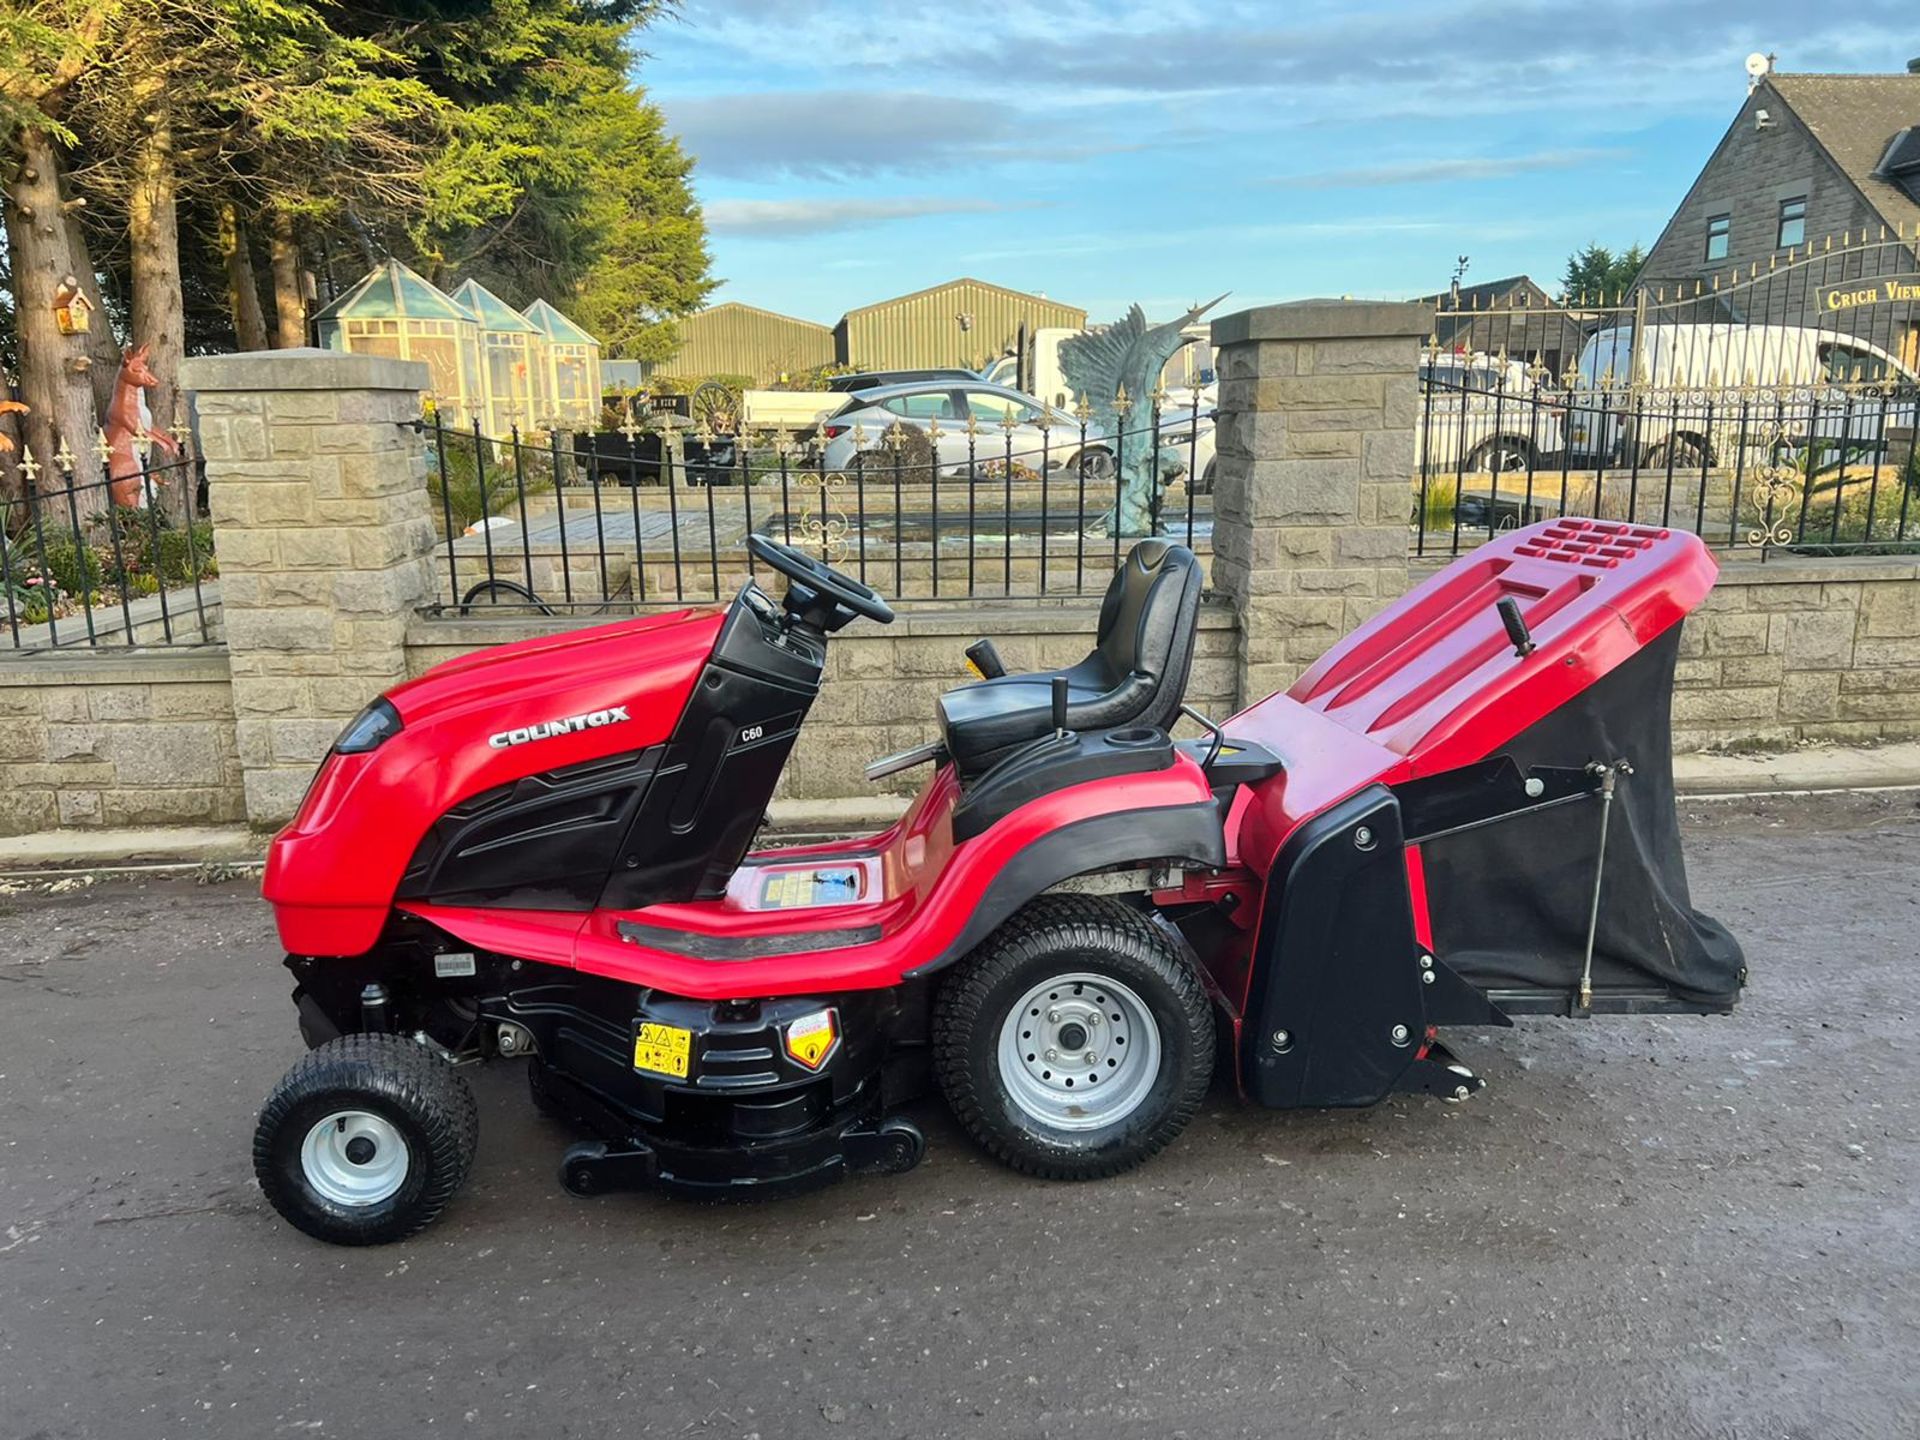 2016 WESTWOOD/COUNTAX 60 RIDE ON LAWN MOWER WITH PGC, SHOWING A LOW 102 HOURS *NO VAT* - Image 3 of 8